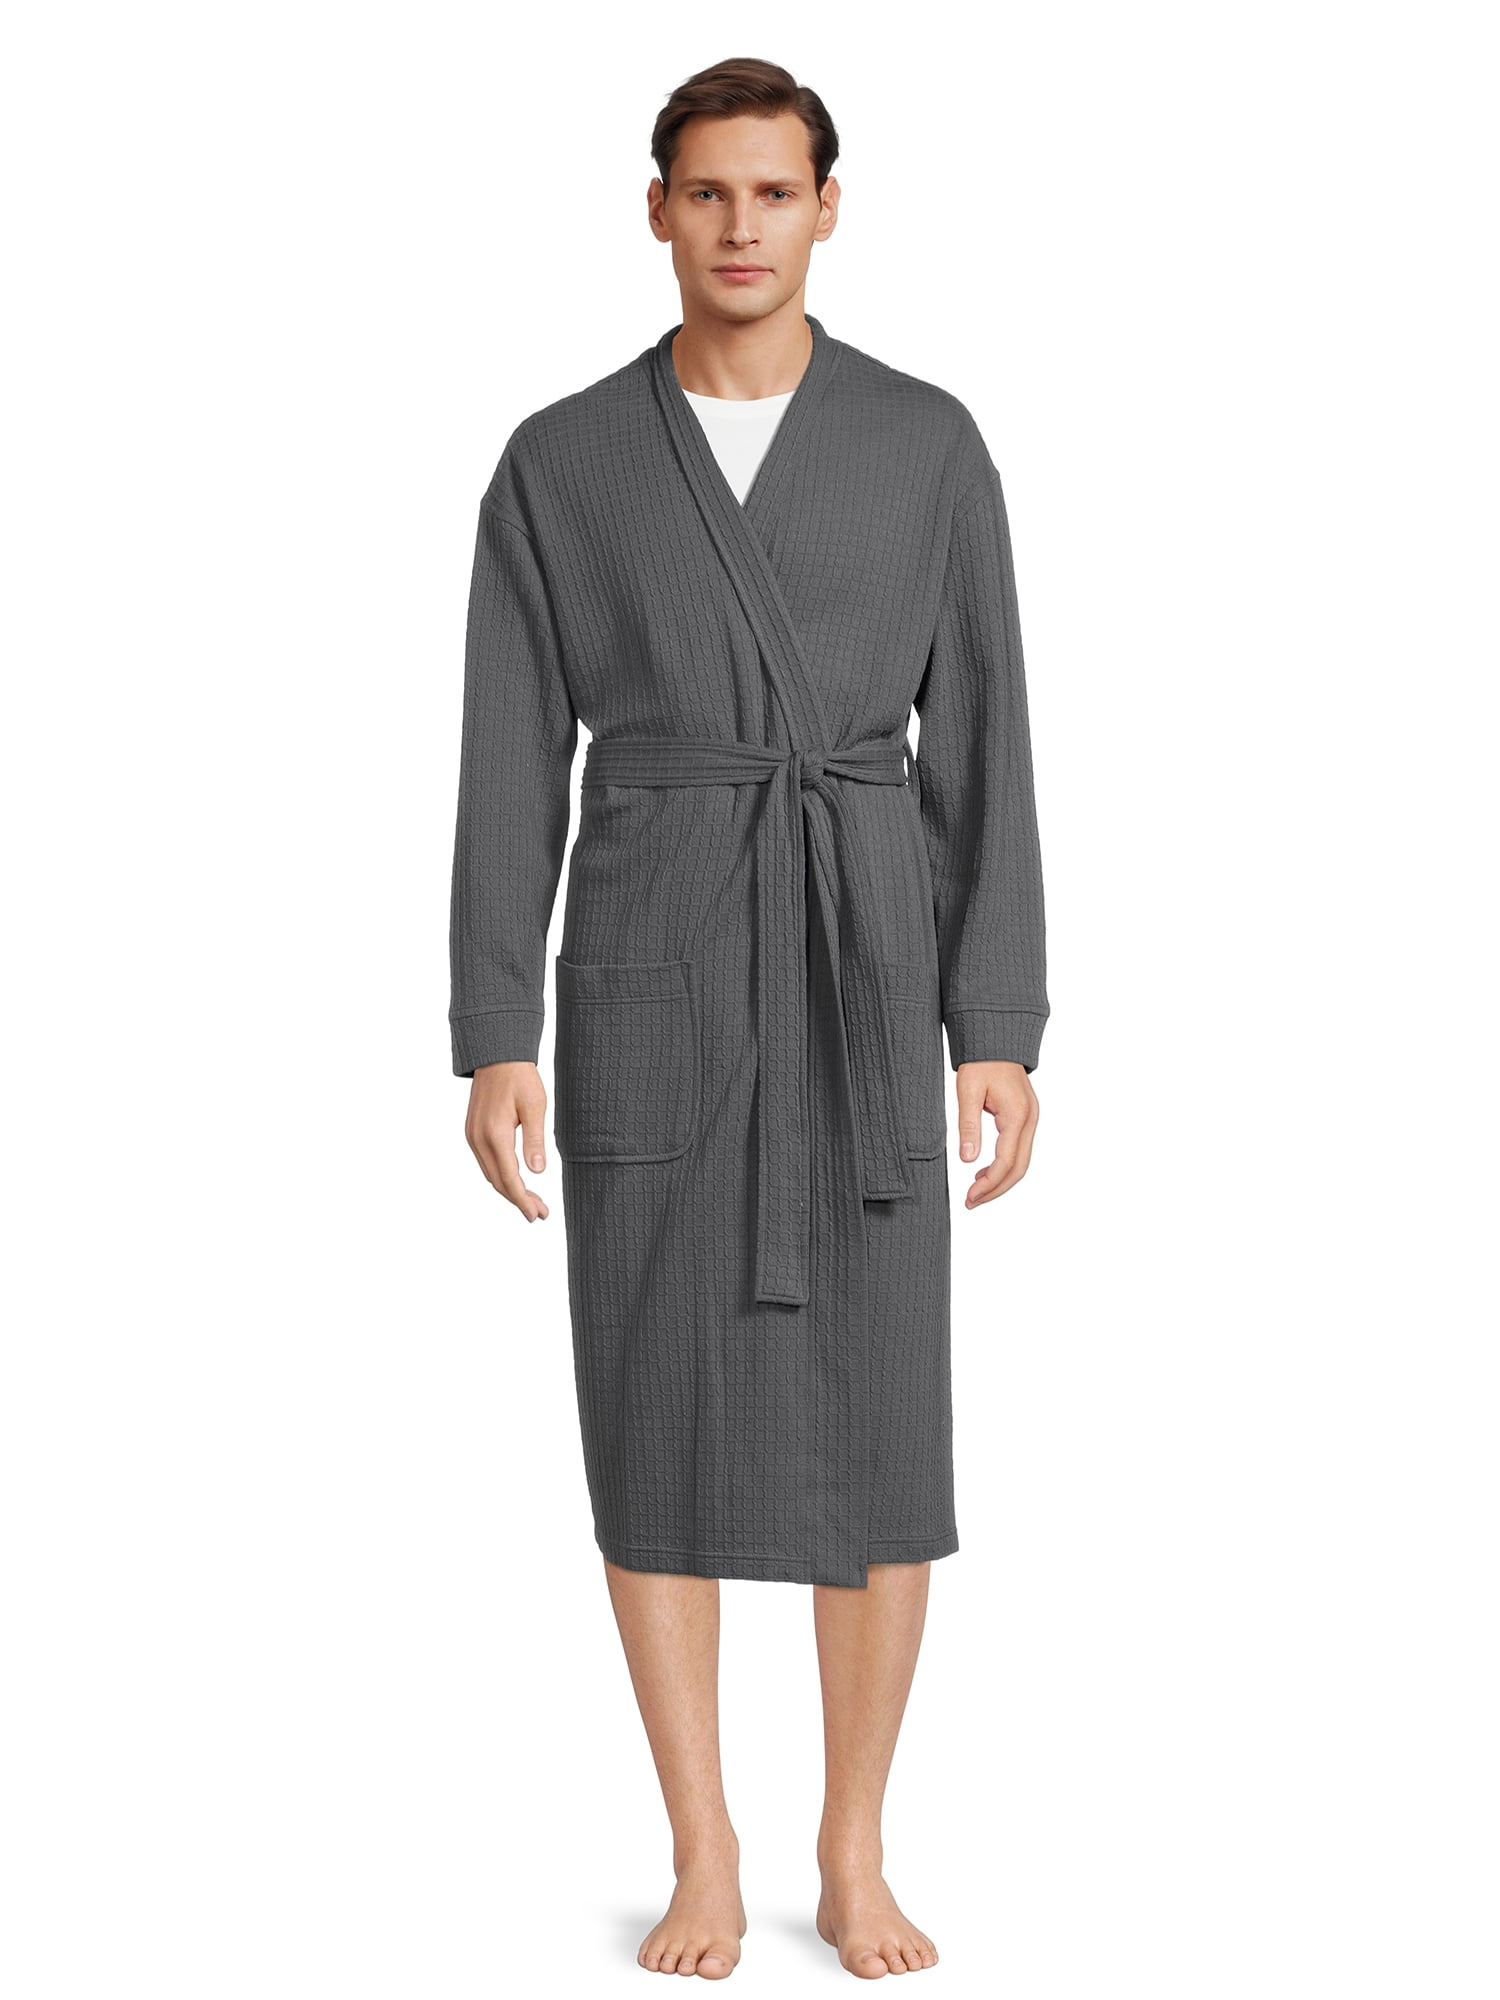 Ande Men's Belted Waffle Robe with Pockets - Walmart.com